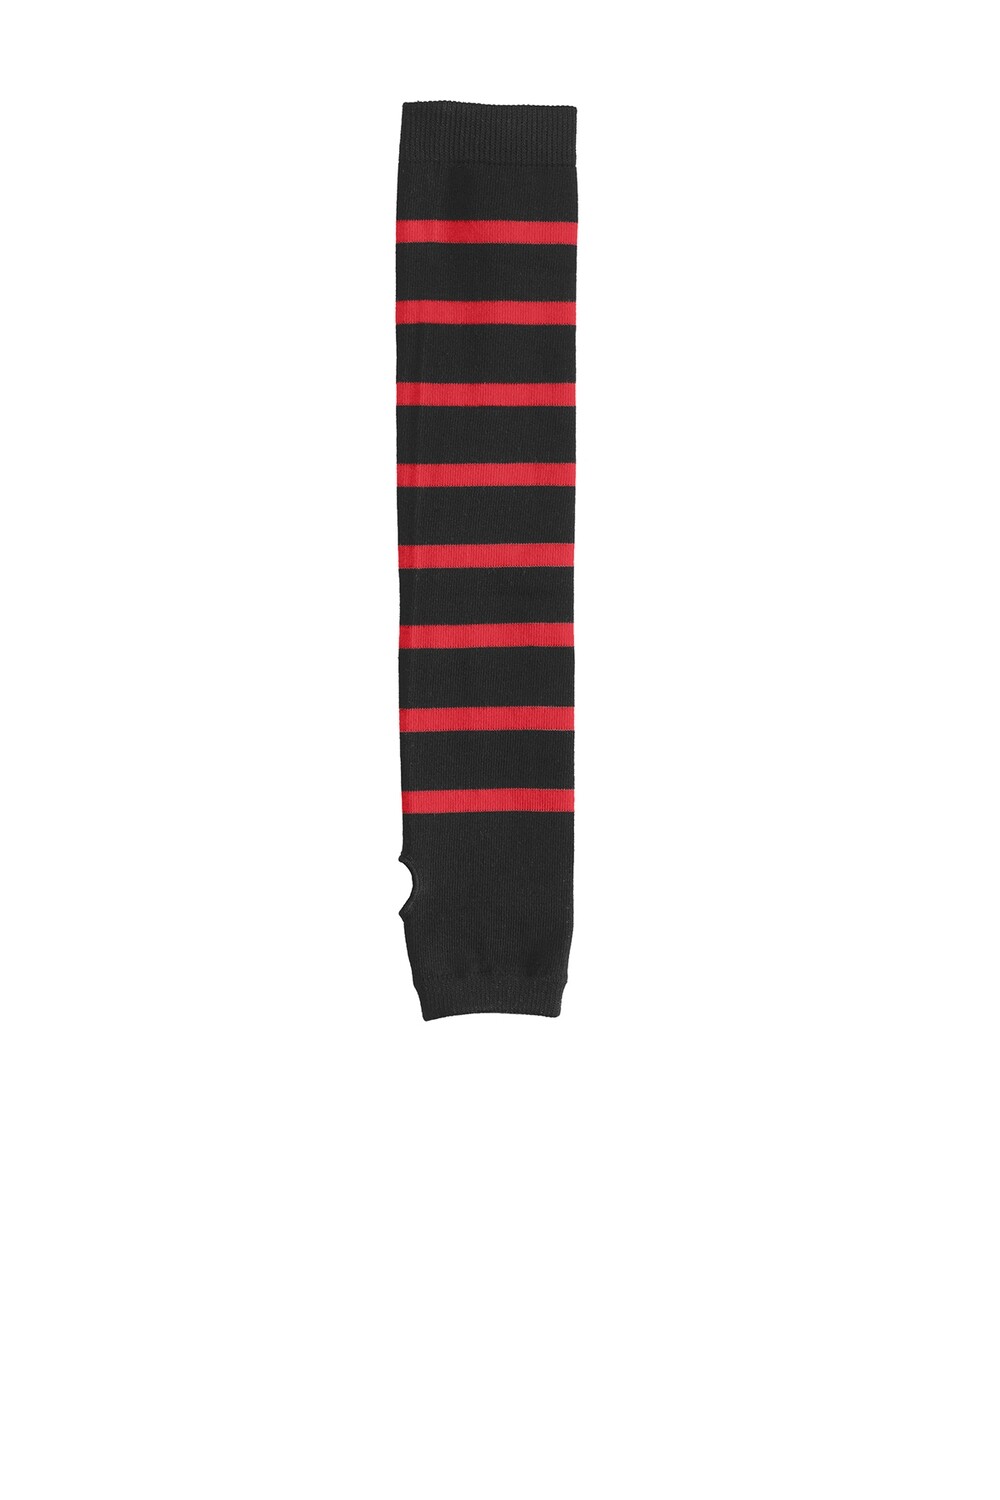 CTCS All FUN and WARM!!!  Striped ARM SOCKS-  You are buying a PAIR